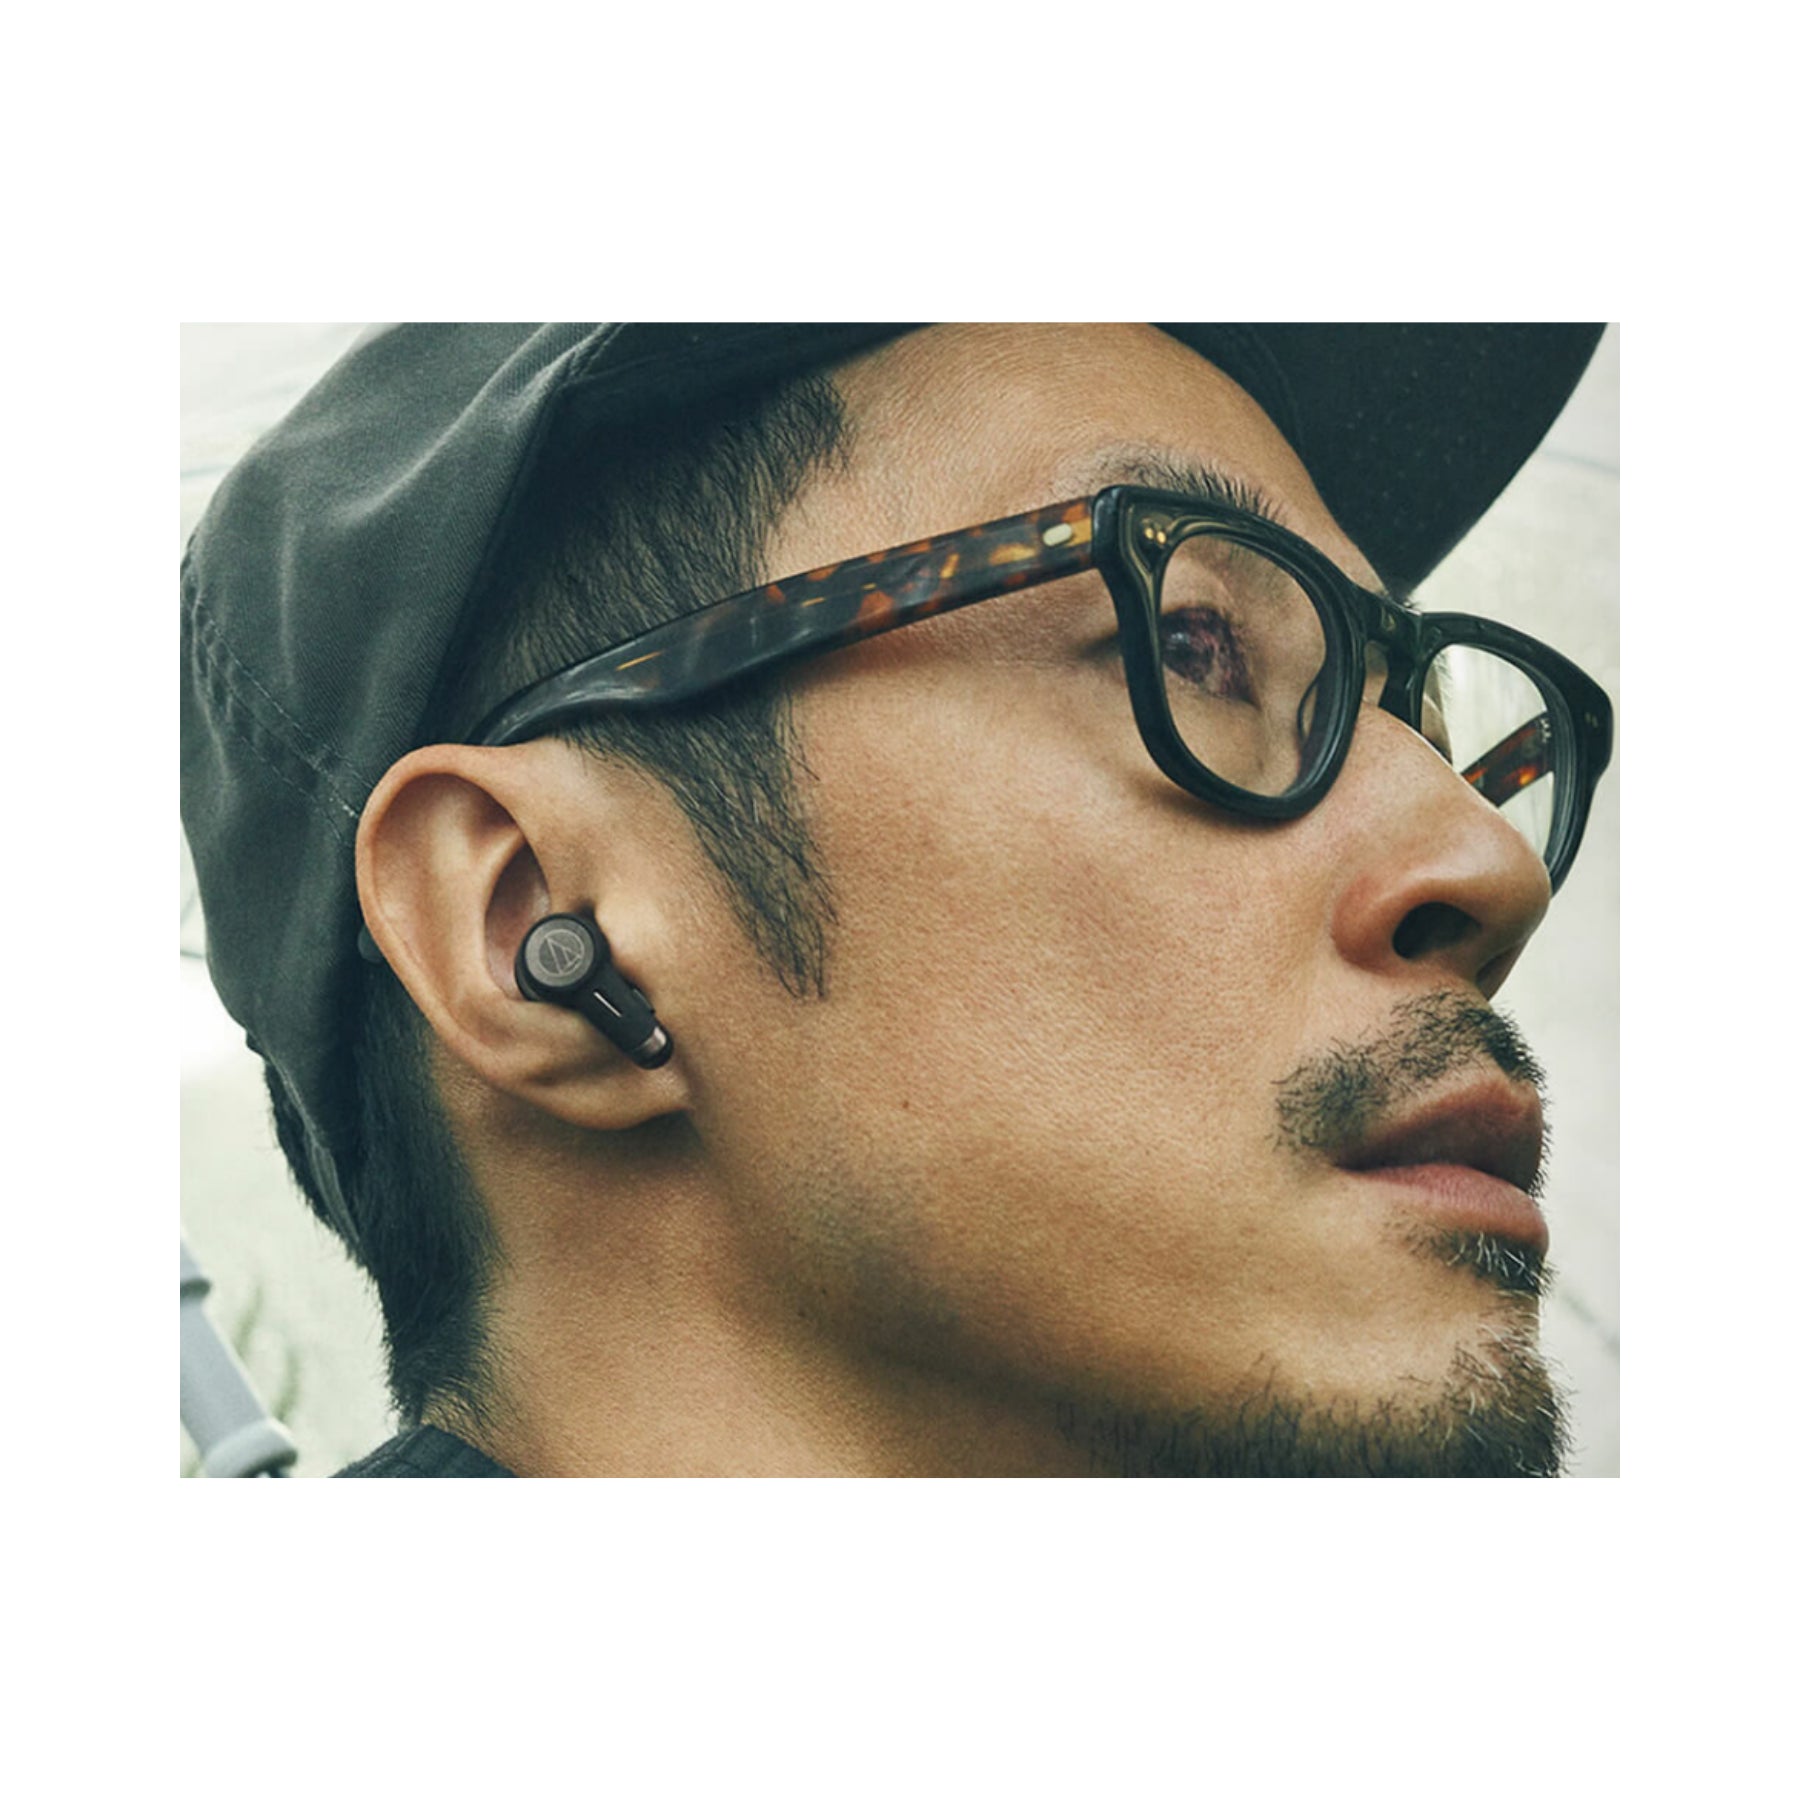 Audio-Technica ATH-TWX9 earbuds review: Close to greatness 